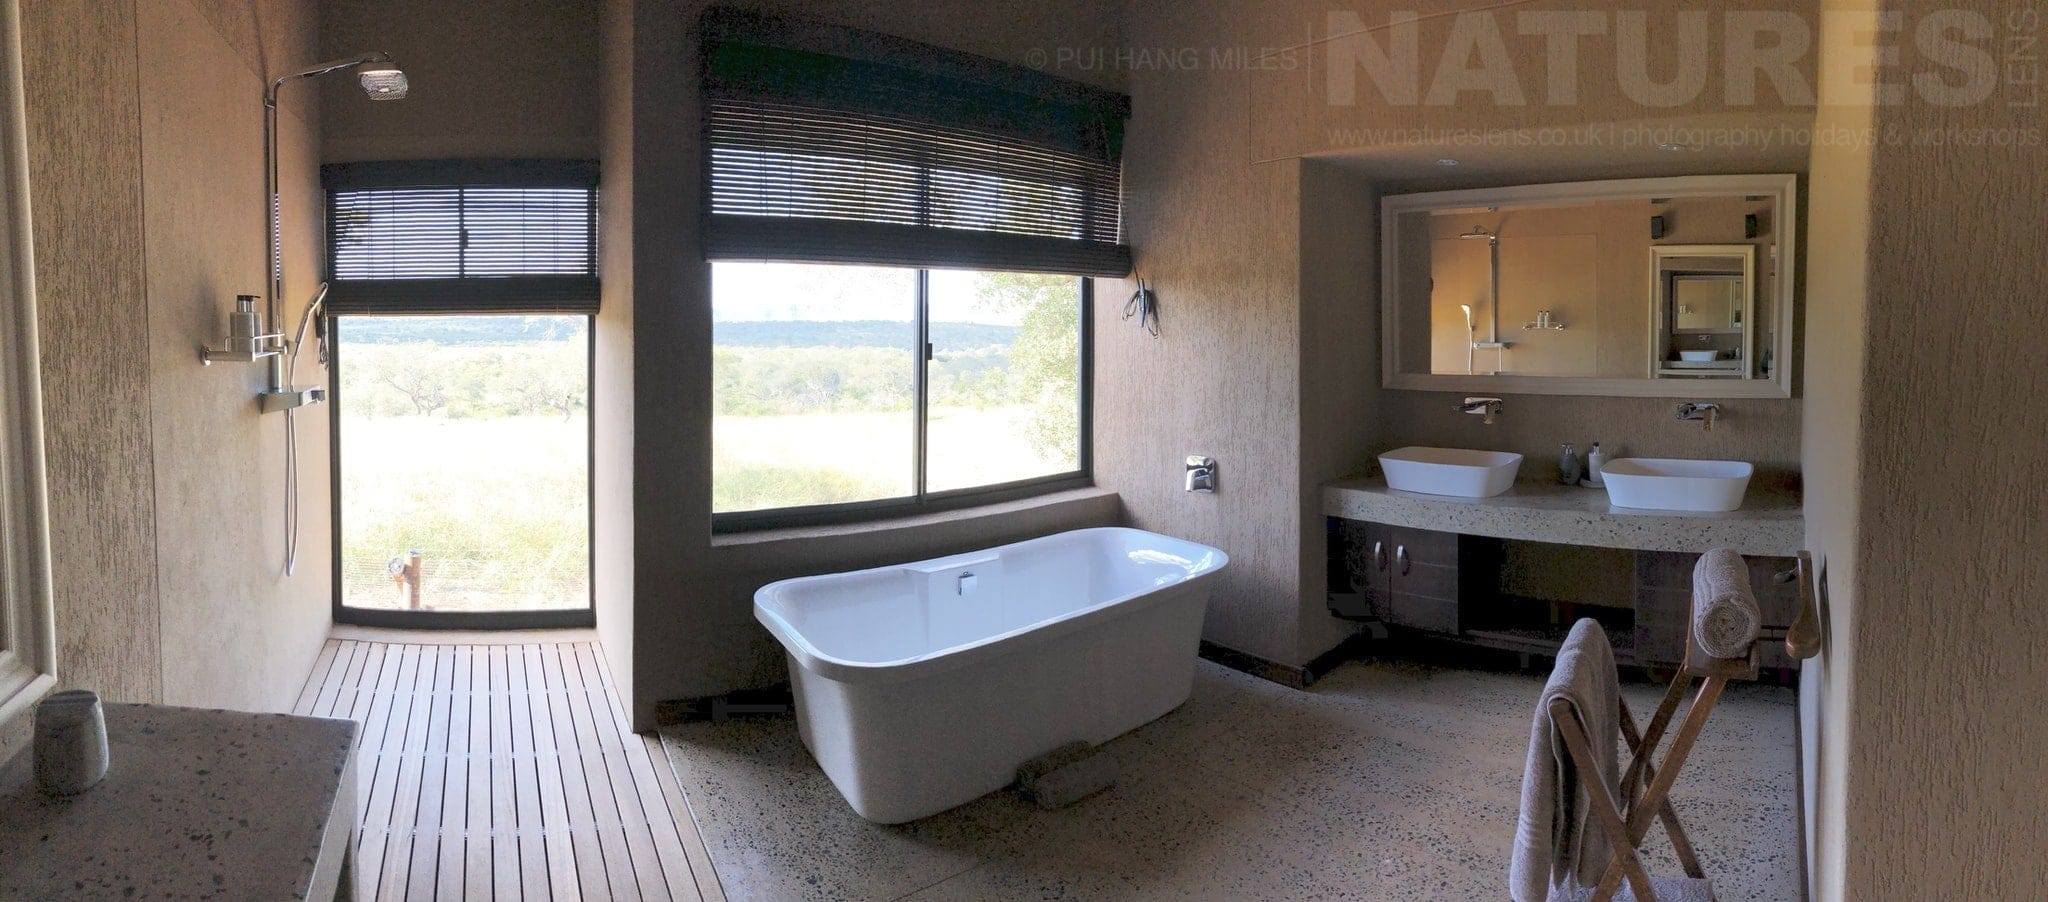 One Of The Bathrooms At Zimanga Reserve The Location For The Natureslens Wildlife Of Zimanga Photography Holiday